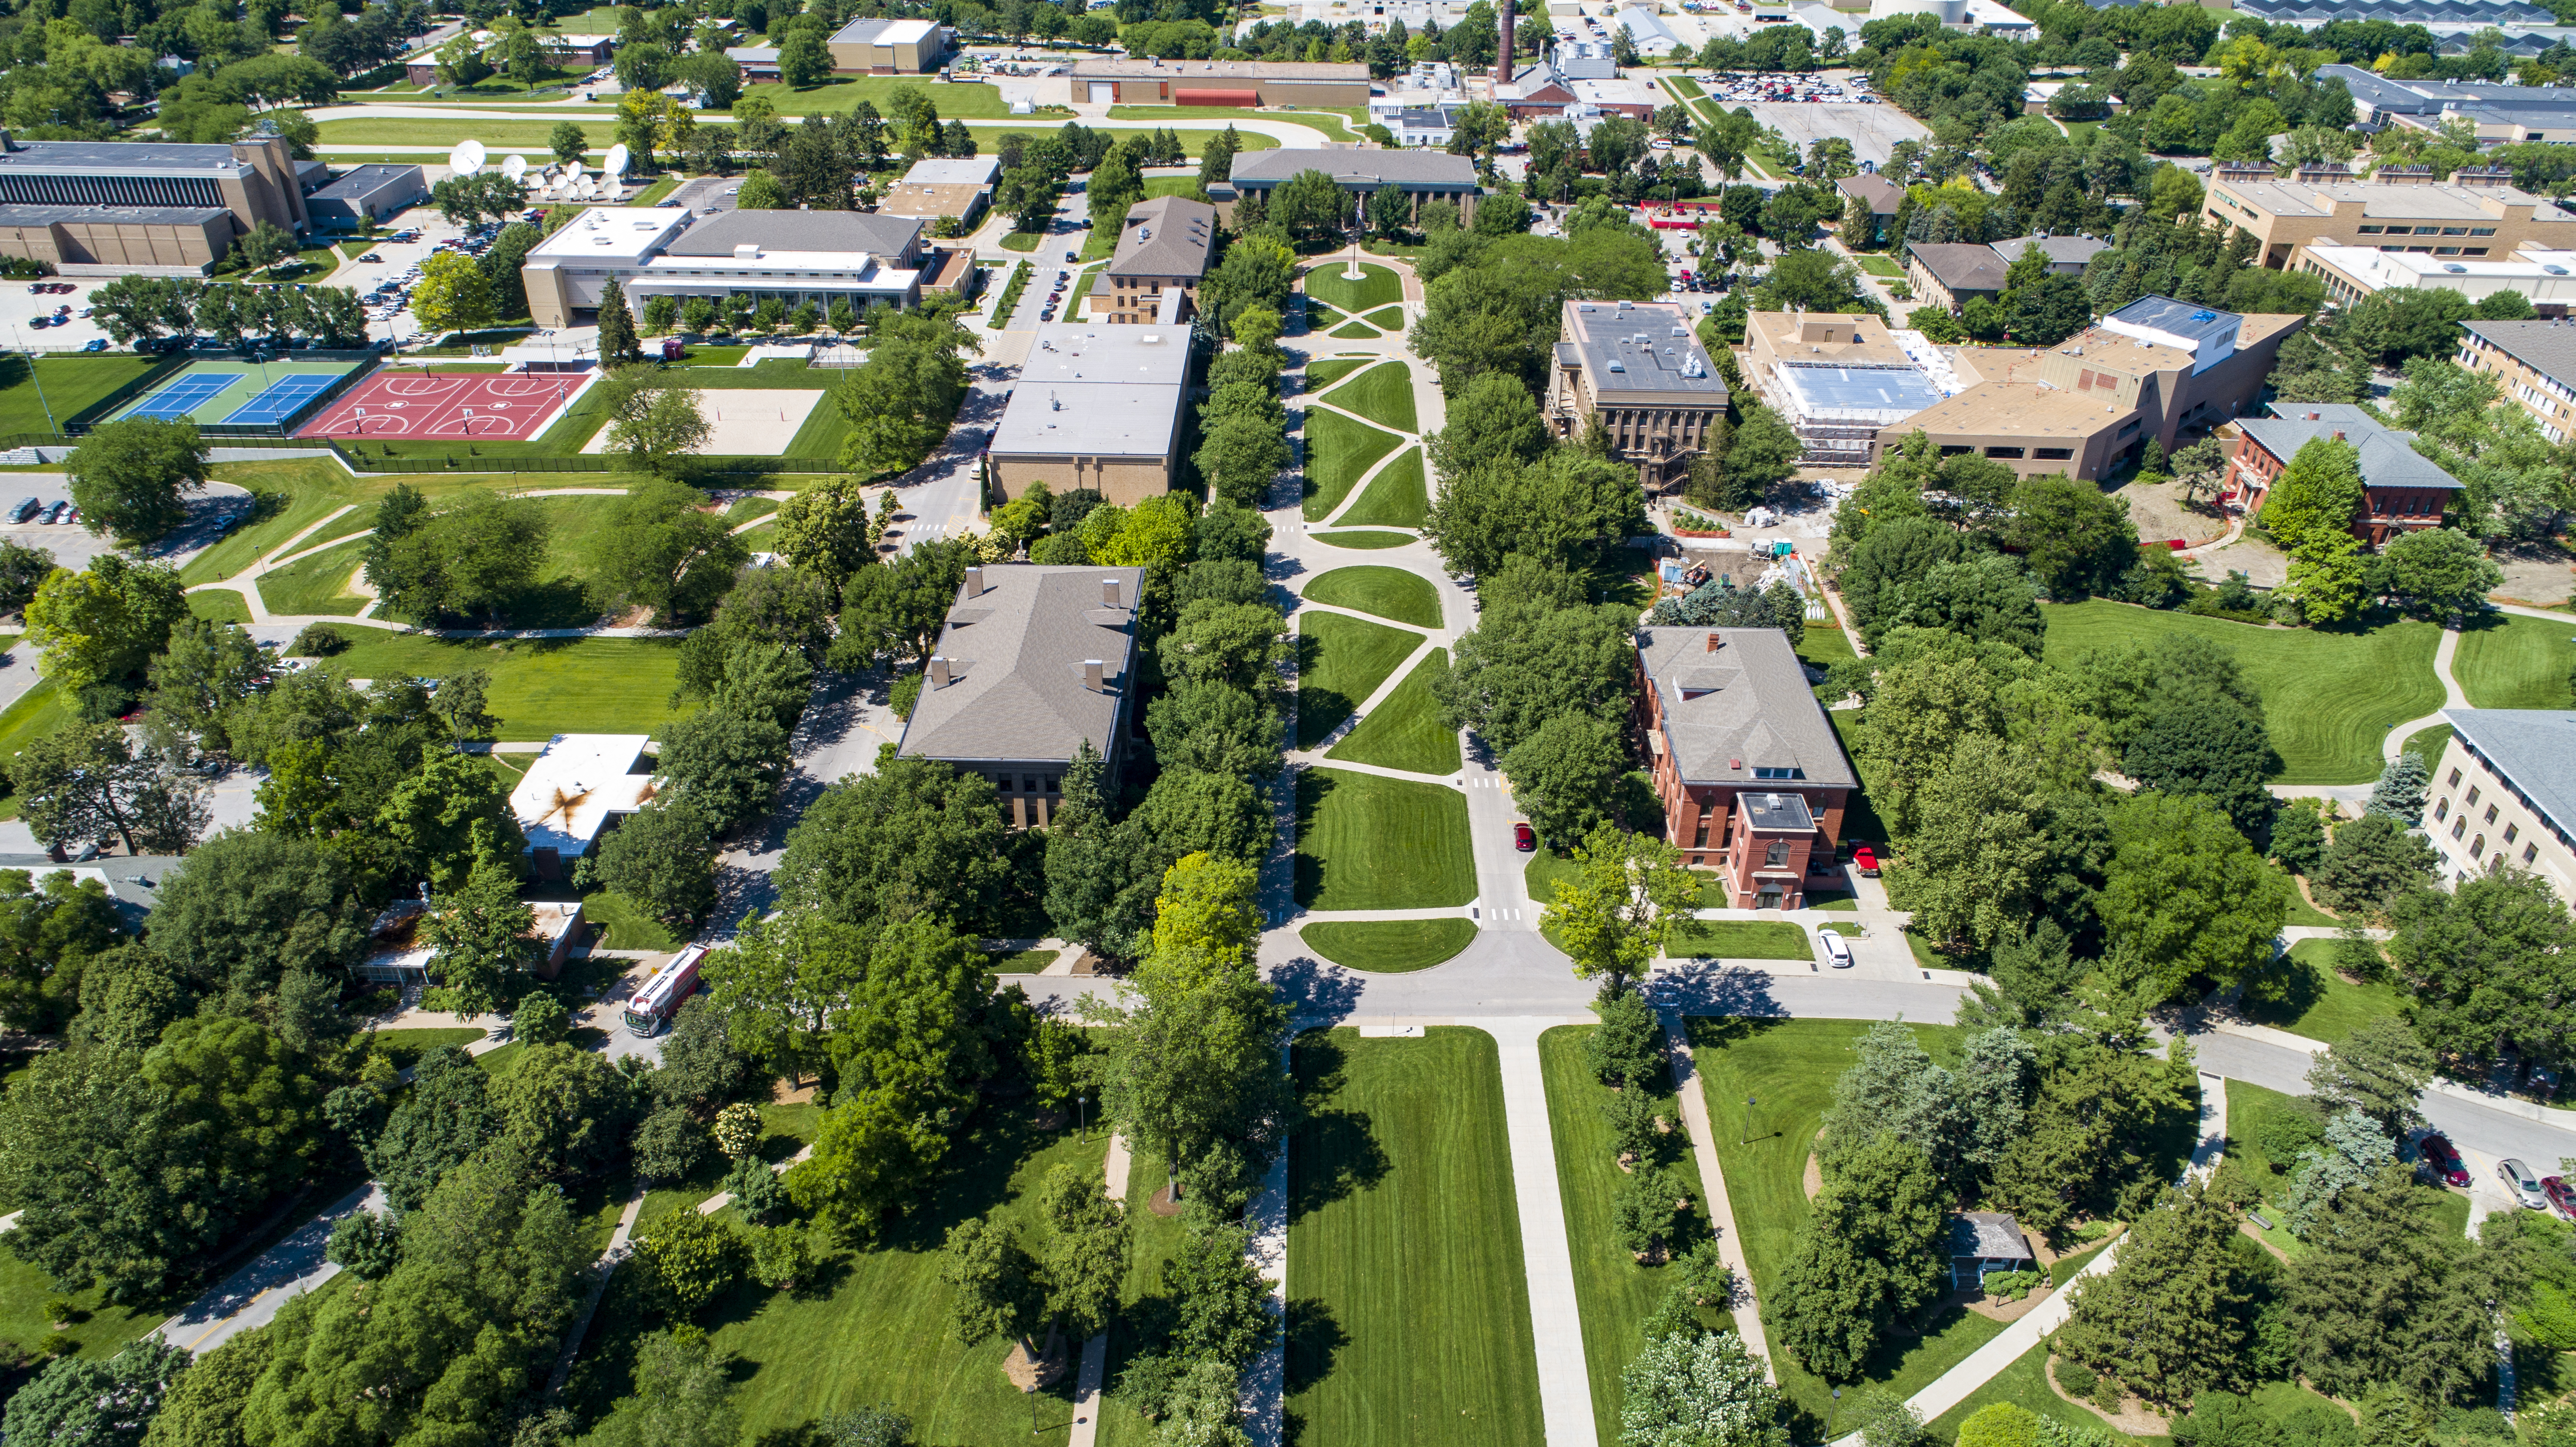 Drone footage over East Campus captures green grass and trees during the summer